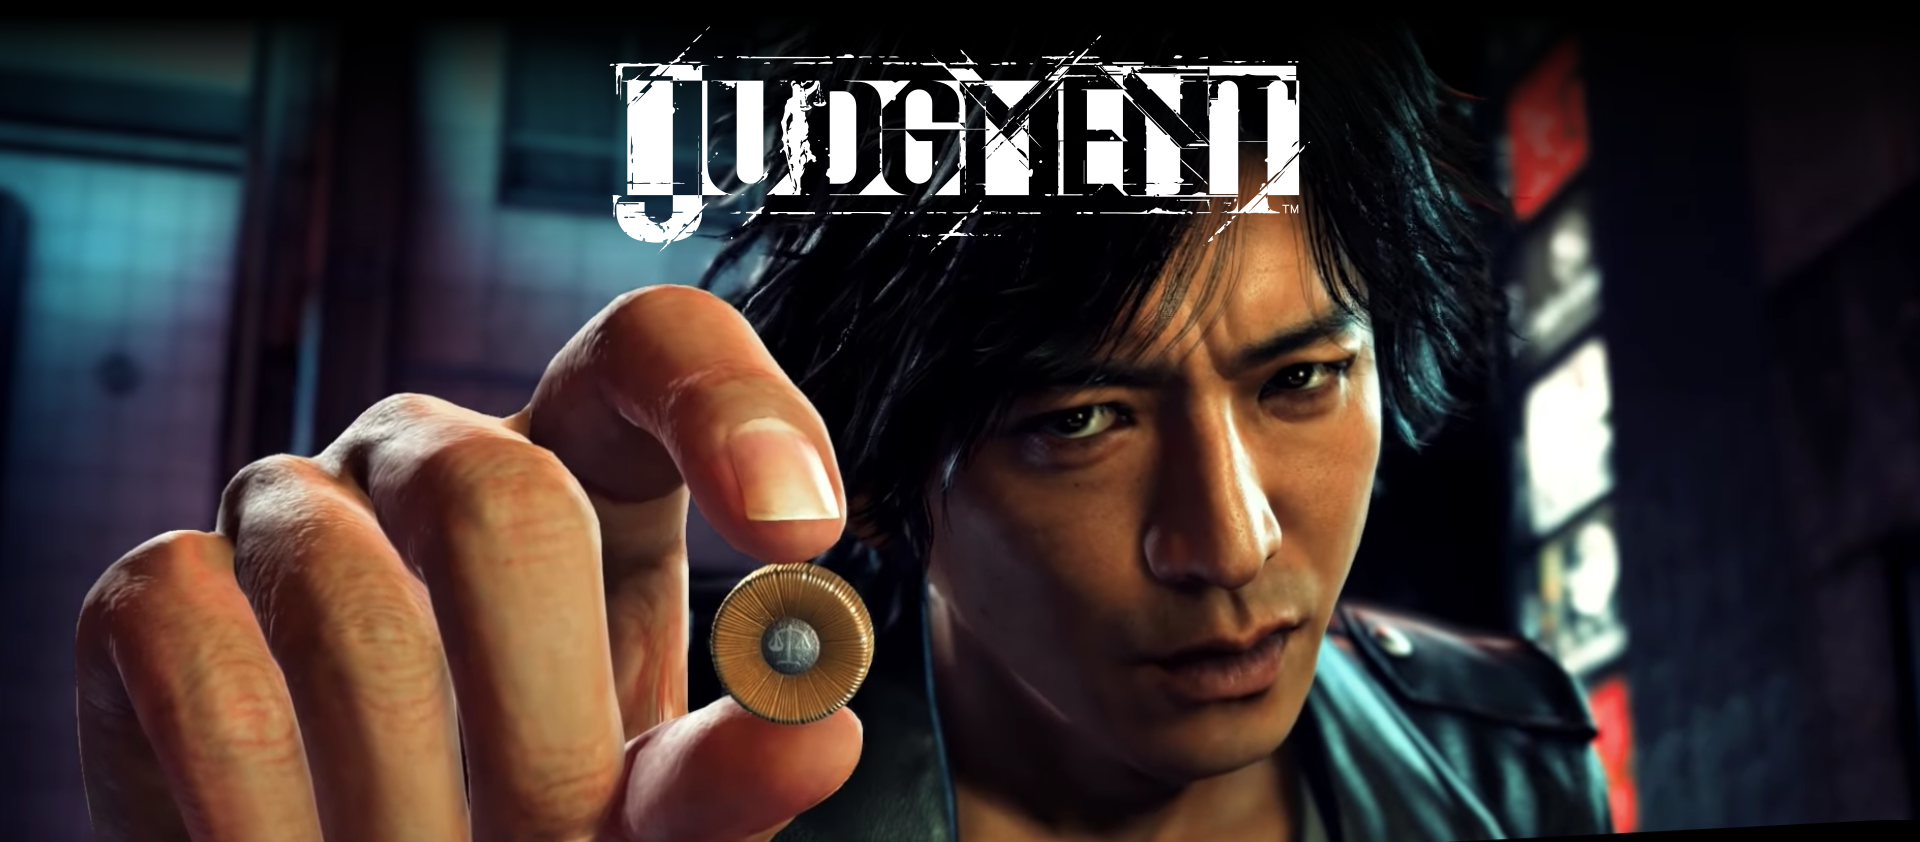 Judgment game release date